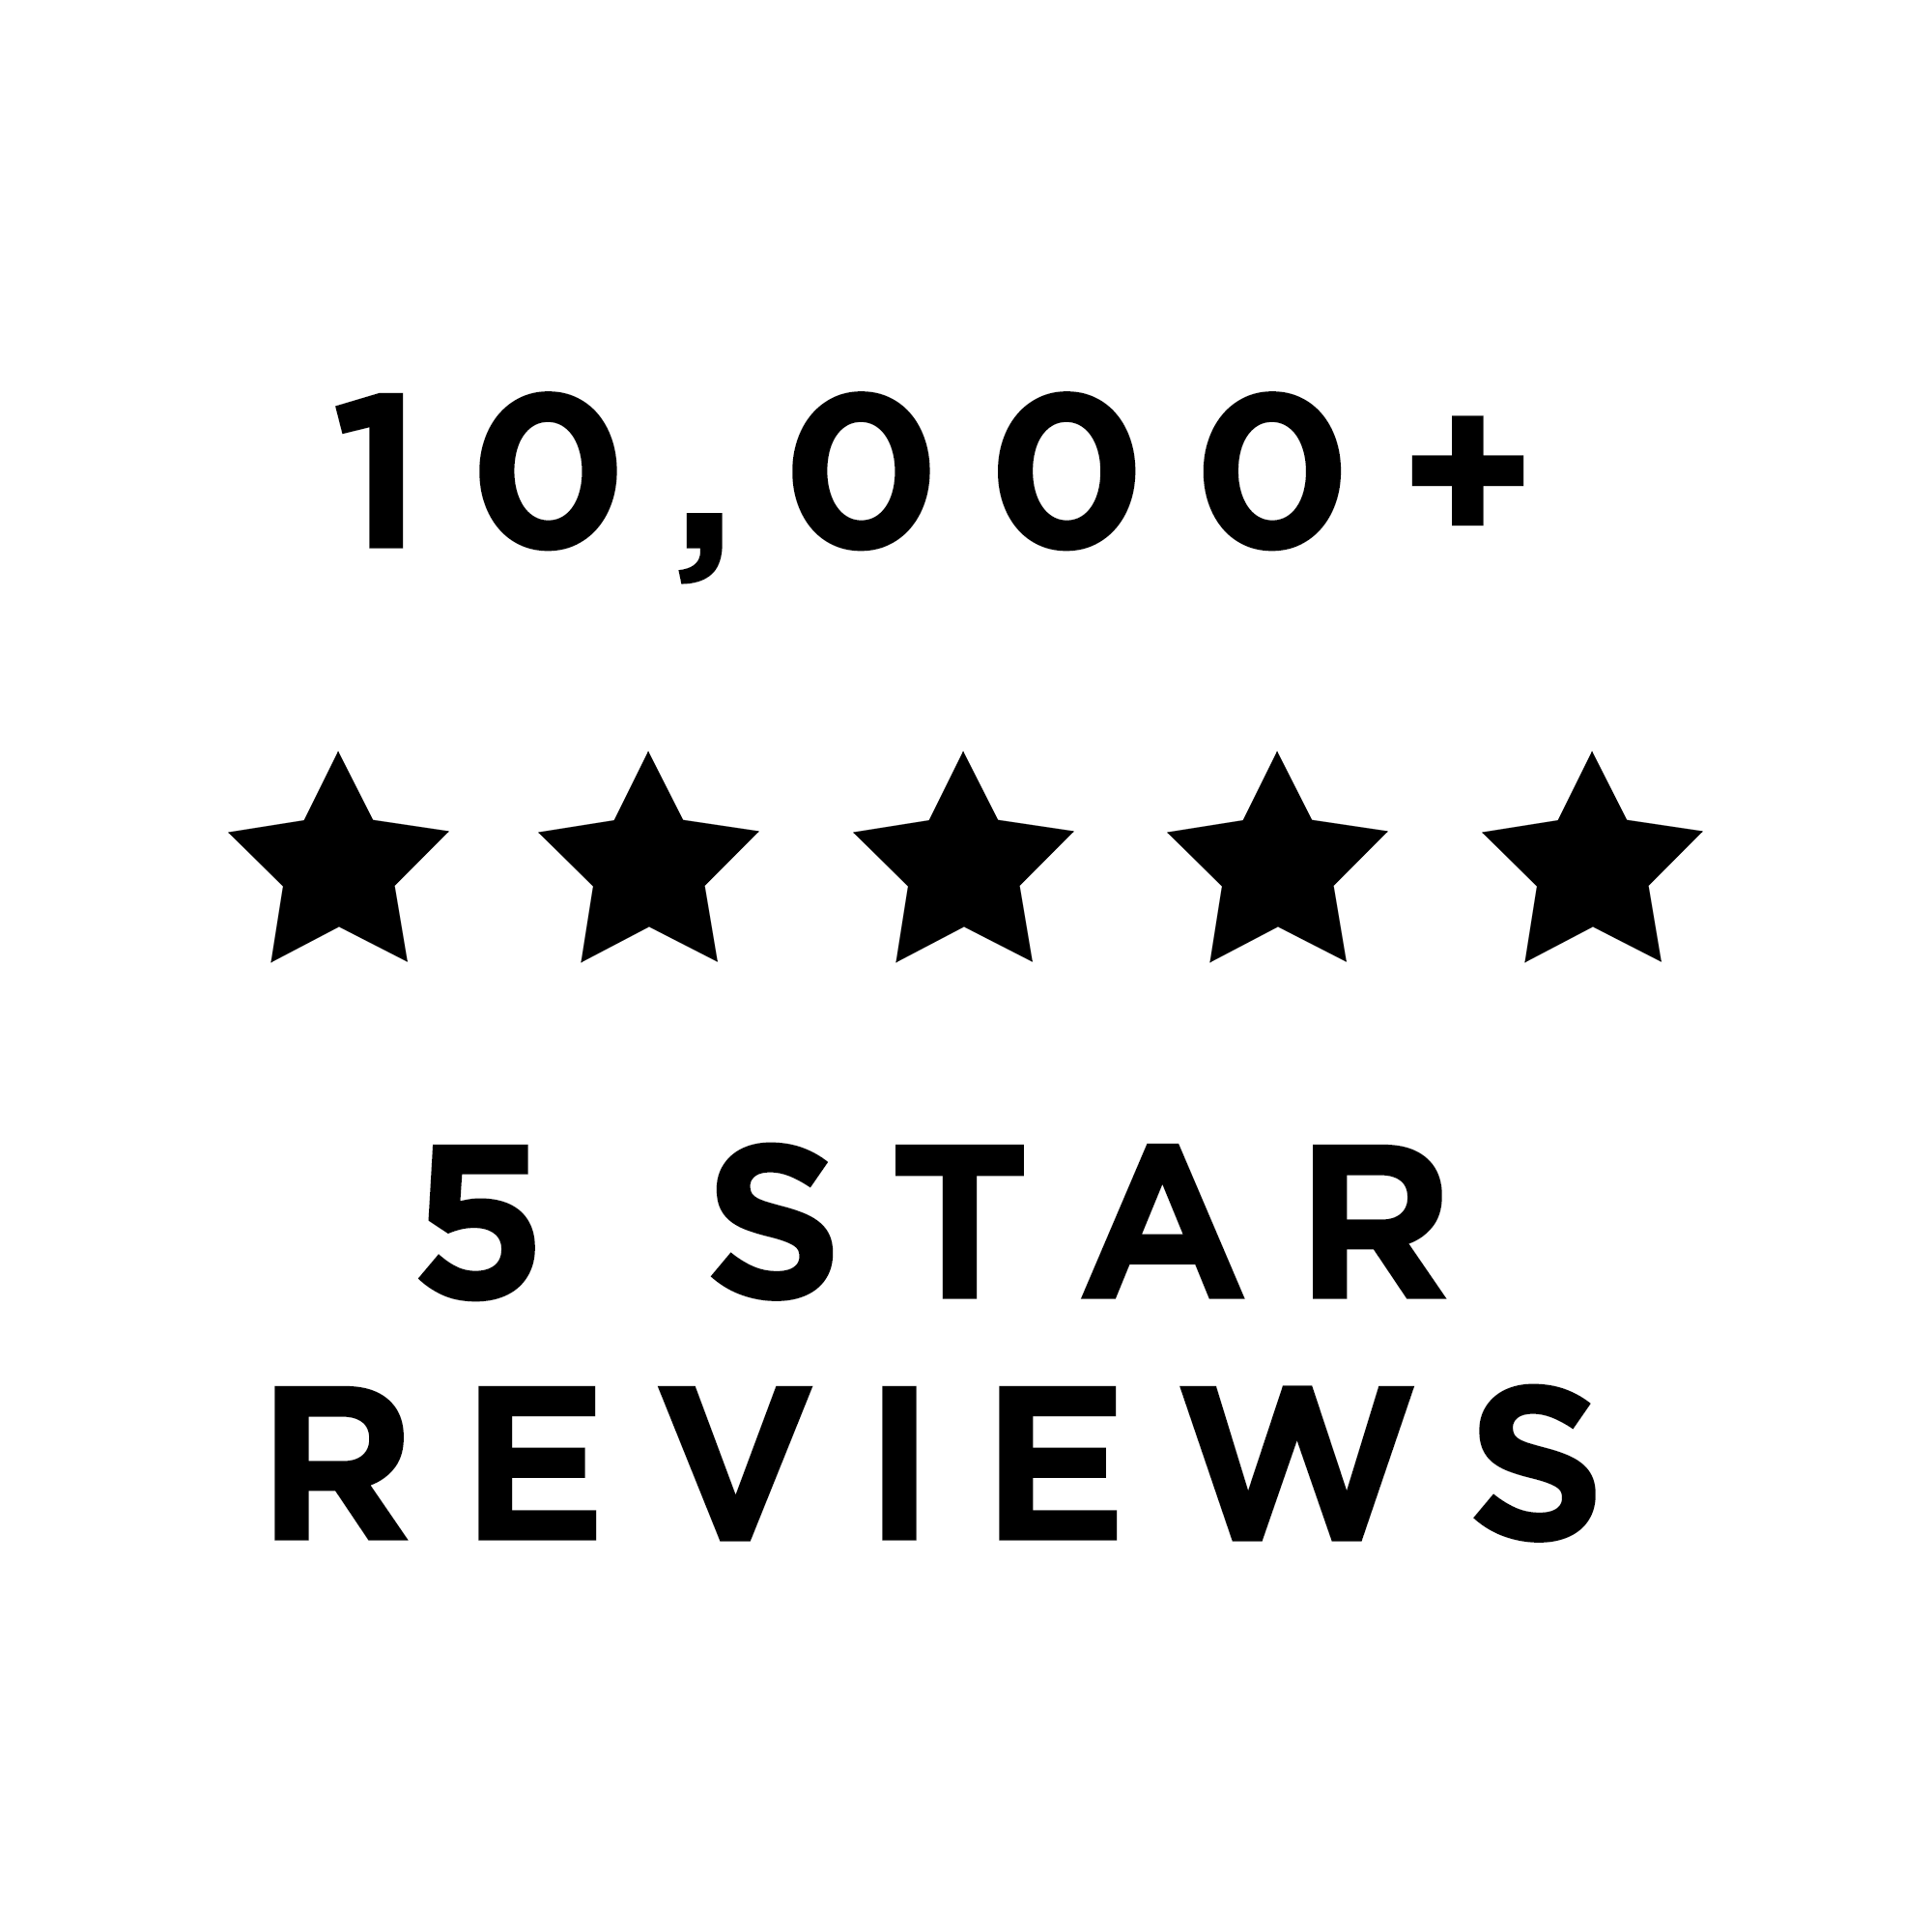 Over 10,000 5 star reviews!